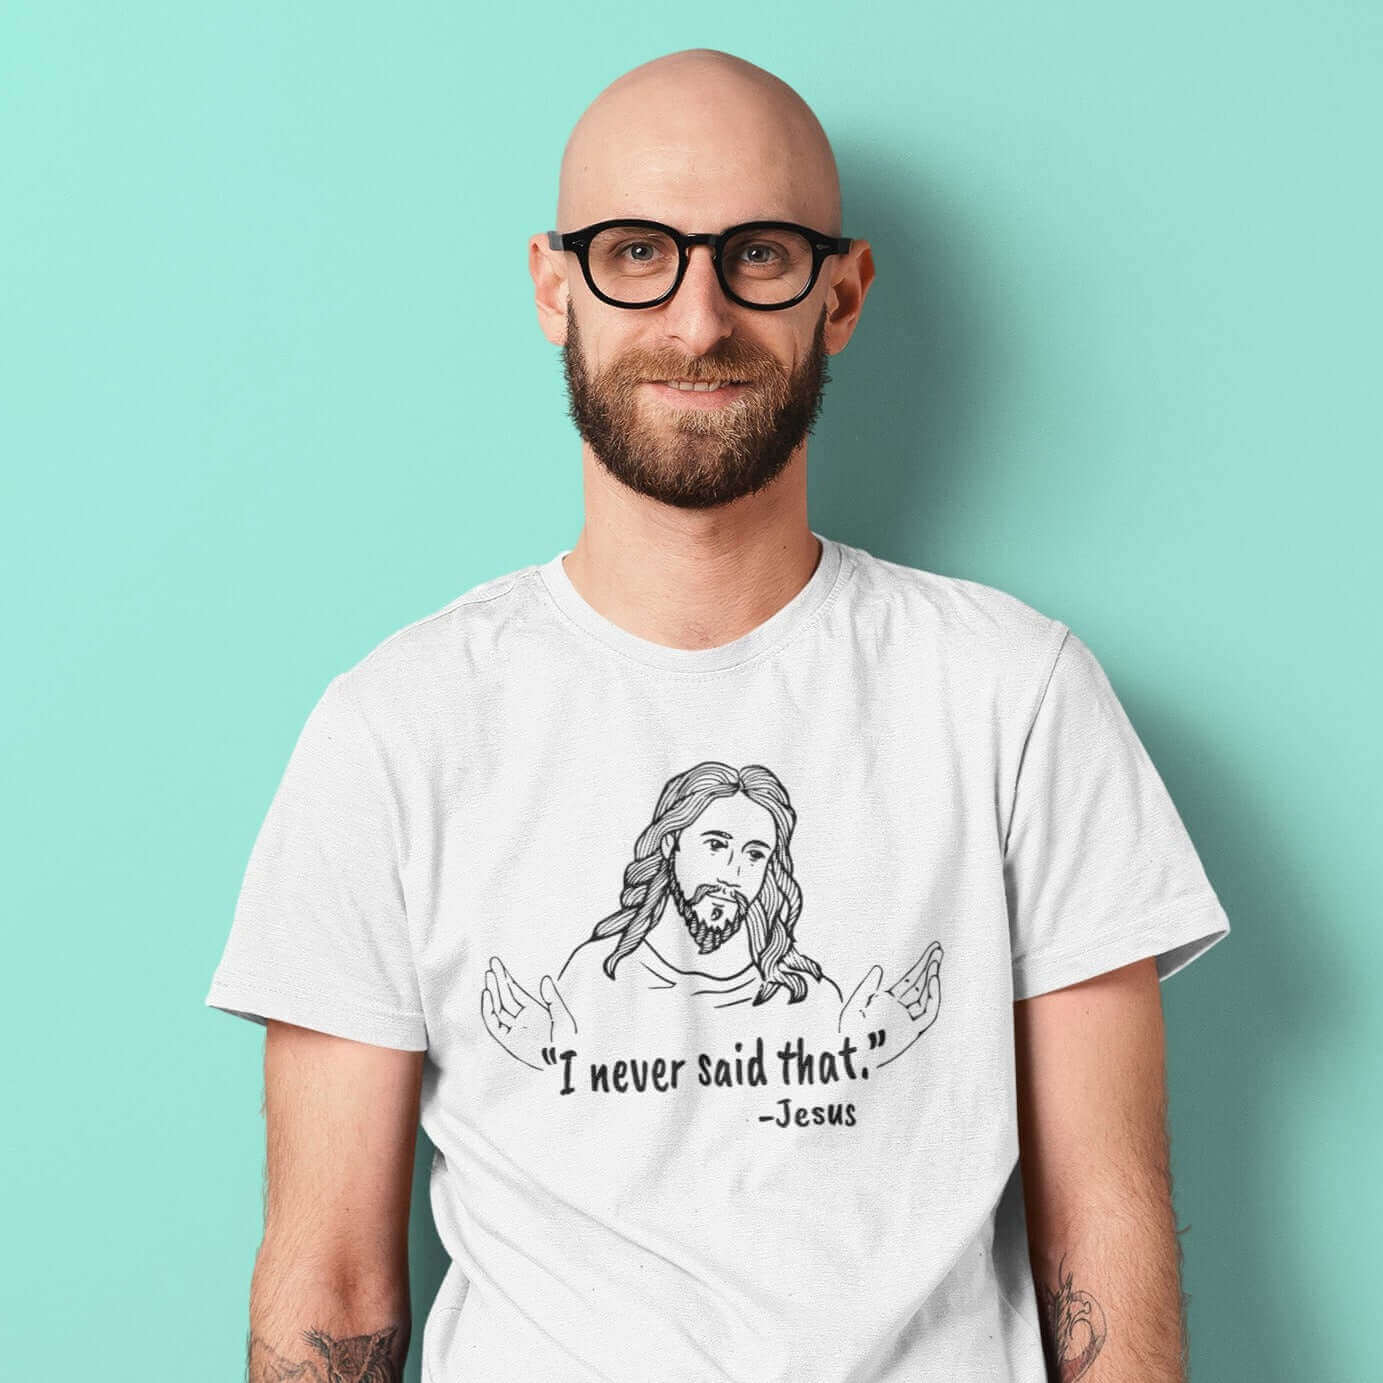 Bald man wearing a white t-shirt with a line drawing of Jesus with his hands outstretched and the quote I never said that printed on the front.